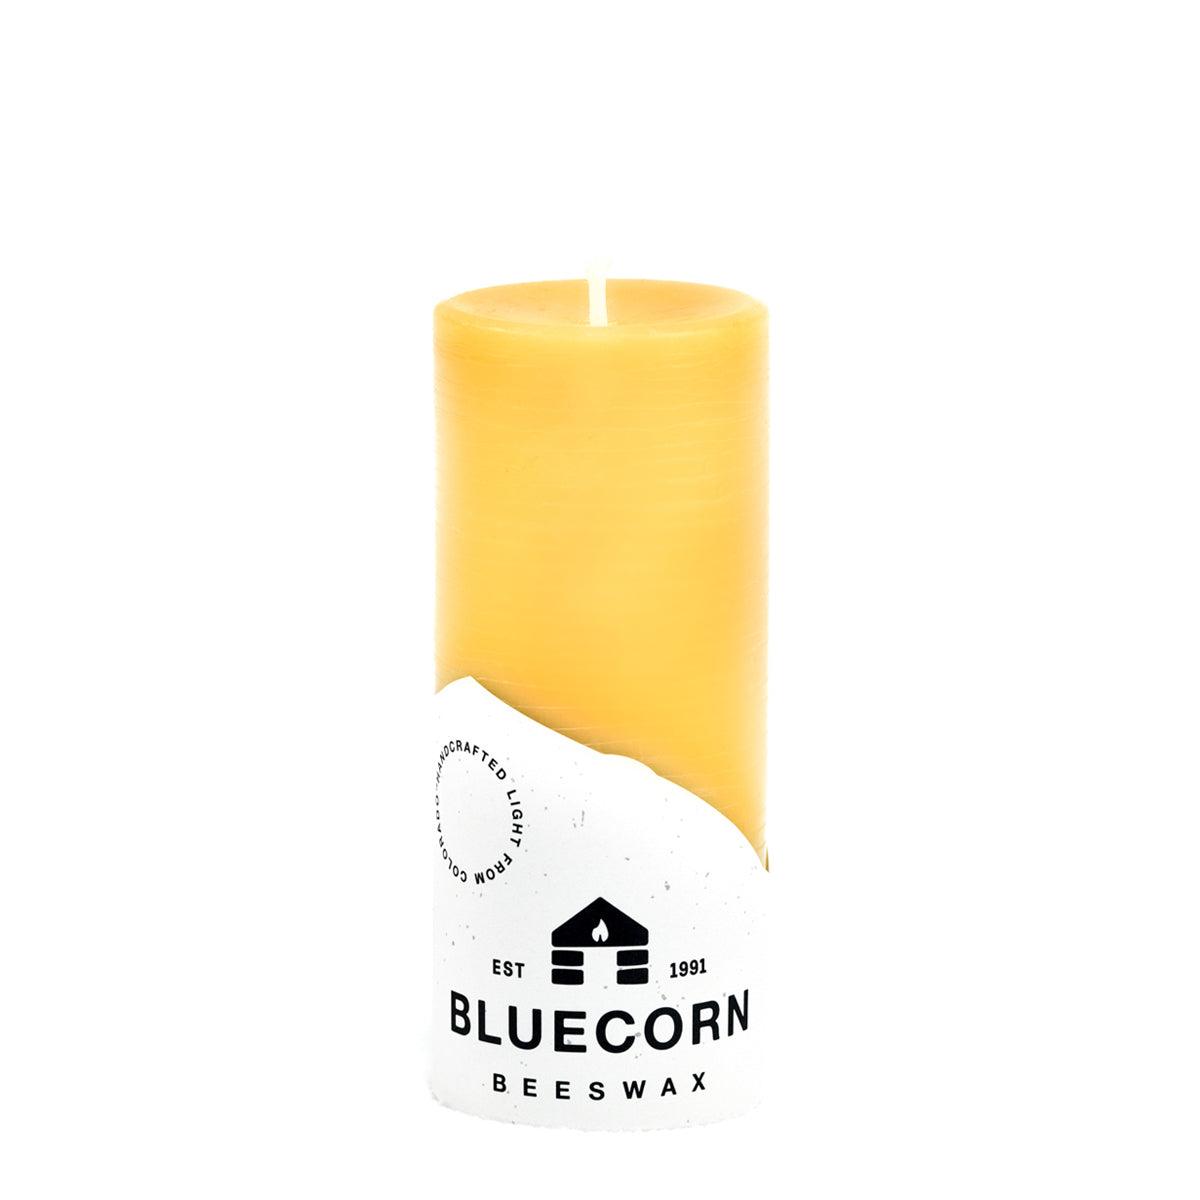 Bluecorn Beeswax 100% Pure Beeswax 2" x 4.5" Raw Pillar Candle. Burn Time: 36 hours. Made with 100% Pure Beeswax, wax is golden in color with a light honey scent. Made with 100% pure cotton wick, no lead and paraffin free. Clean burning and non-toxic. Features Bluecorn Beeswax label printed on 100% recycled paper. Clearance items might have an odd blemish or air bubble, but will still burn beautifully.